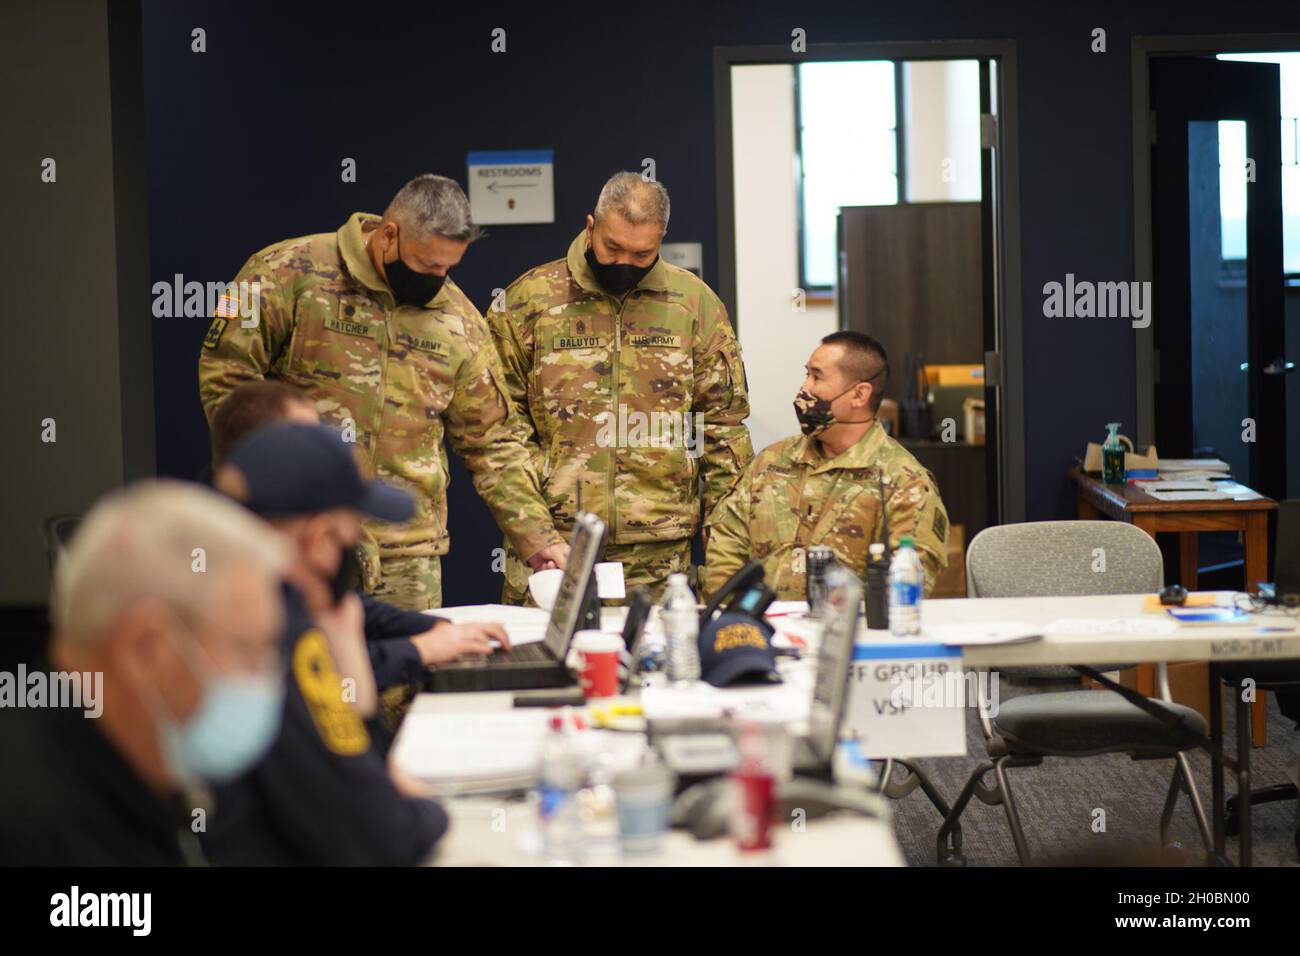 U.S. Army Soldiers with the Hawaii National Guard liaise with Virginia State Police to coordinate traffic security operations, Jan. 20, 2021, Arlington, Va. At least 25,000 National Guard men and women have been authorized to conduct security, communication and logistical missions in support of federal and District authorities leading up and through the 59th Presidential Inauguration. Stock Photo